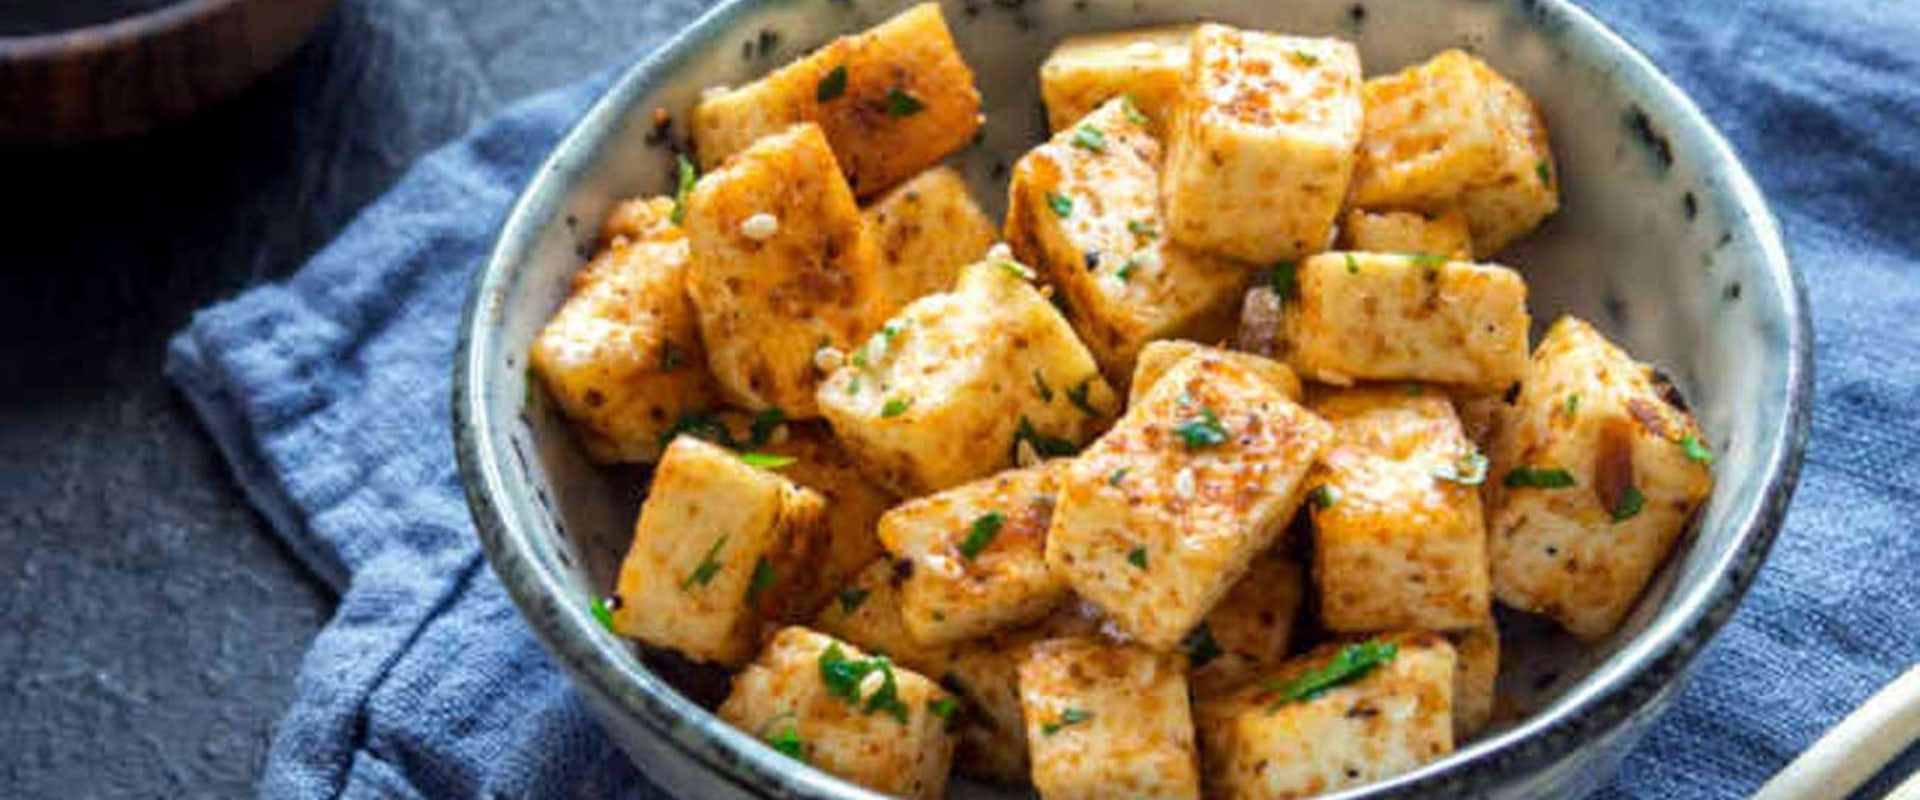 The Benefits of Eating Tofu for Health